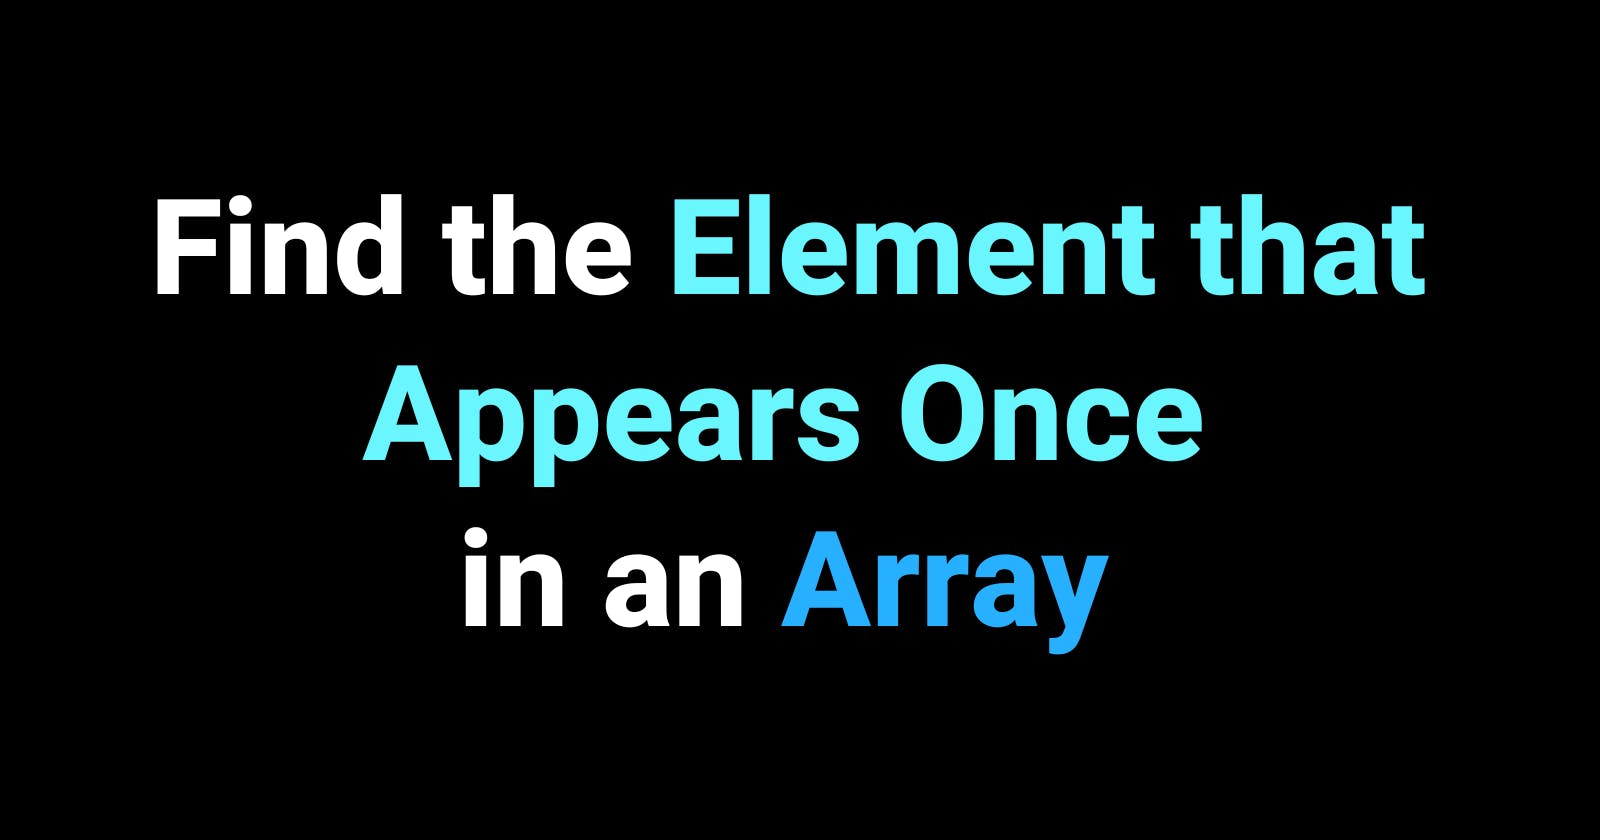 How to Find the Element that Appears Once in an Array